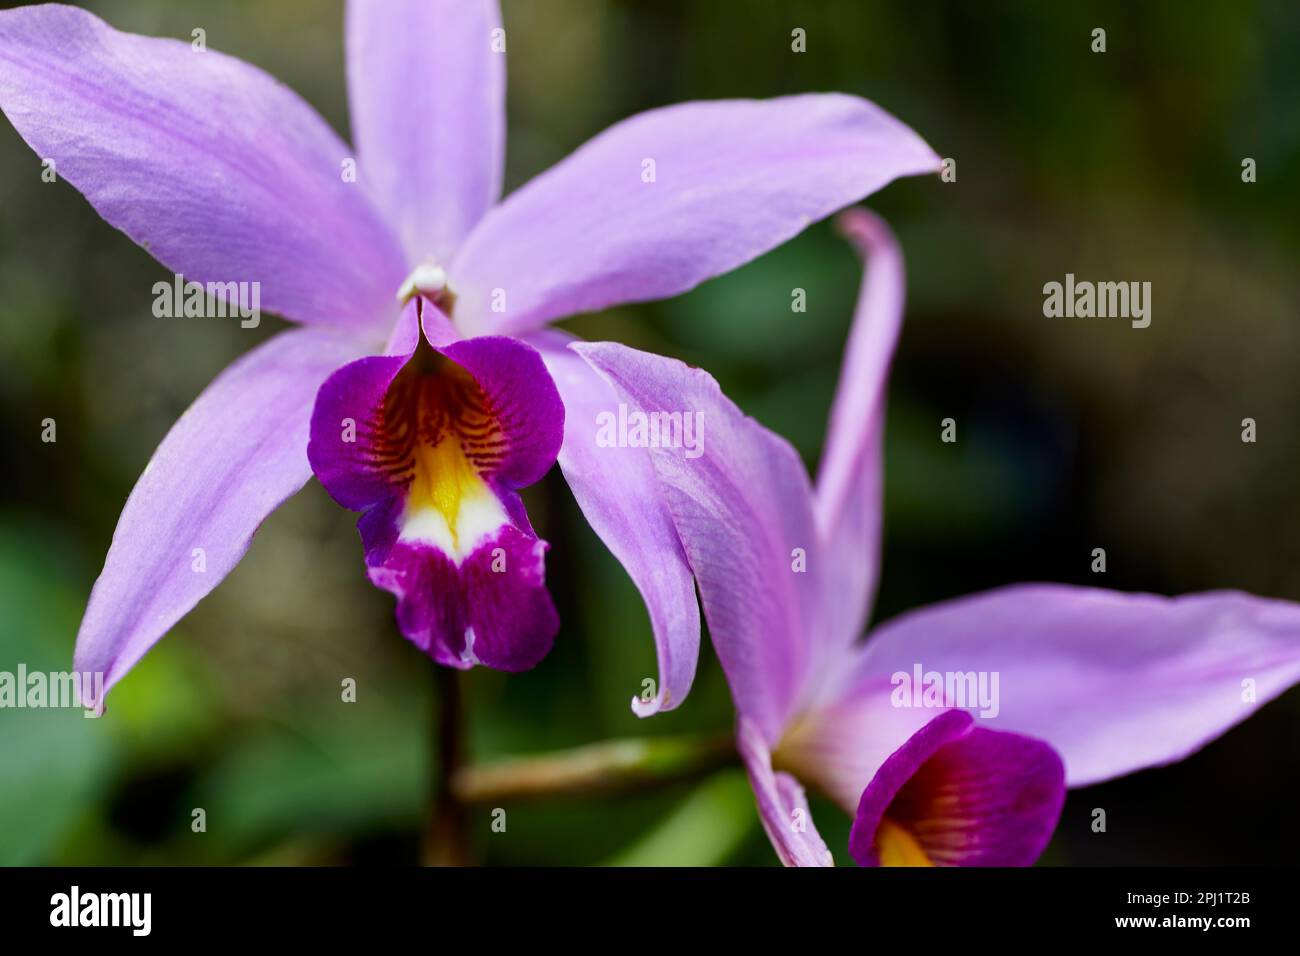 Close up of a Lavendar Laelia Orchid Flower Stock Photo